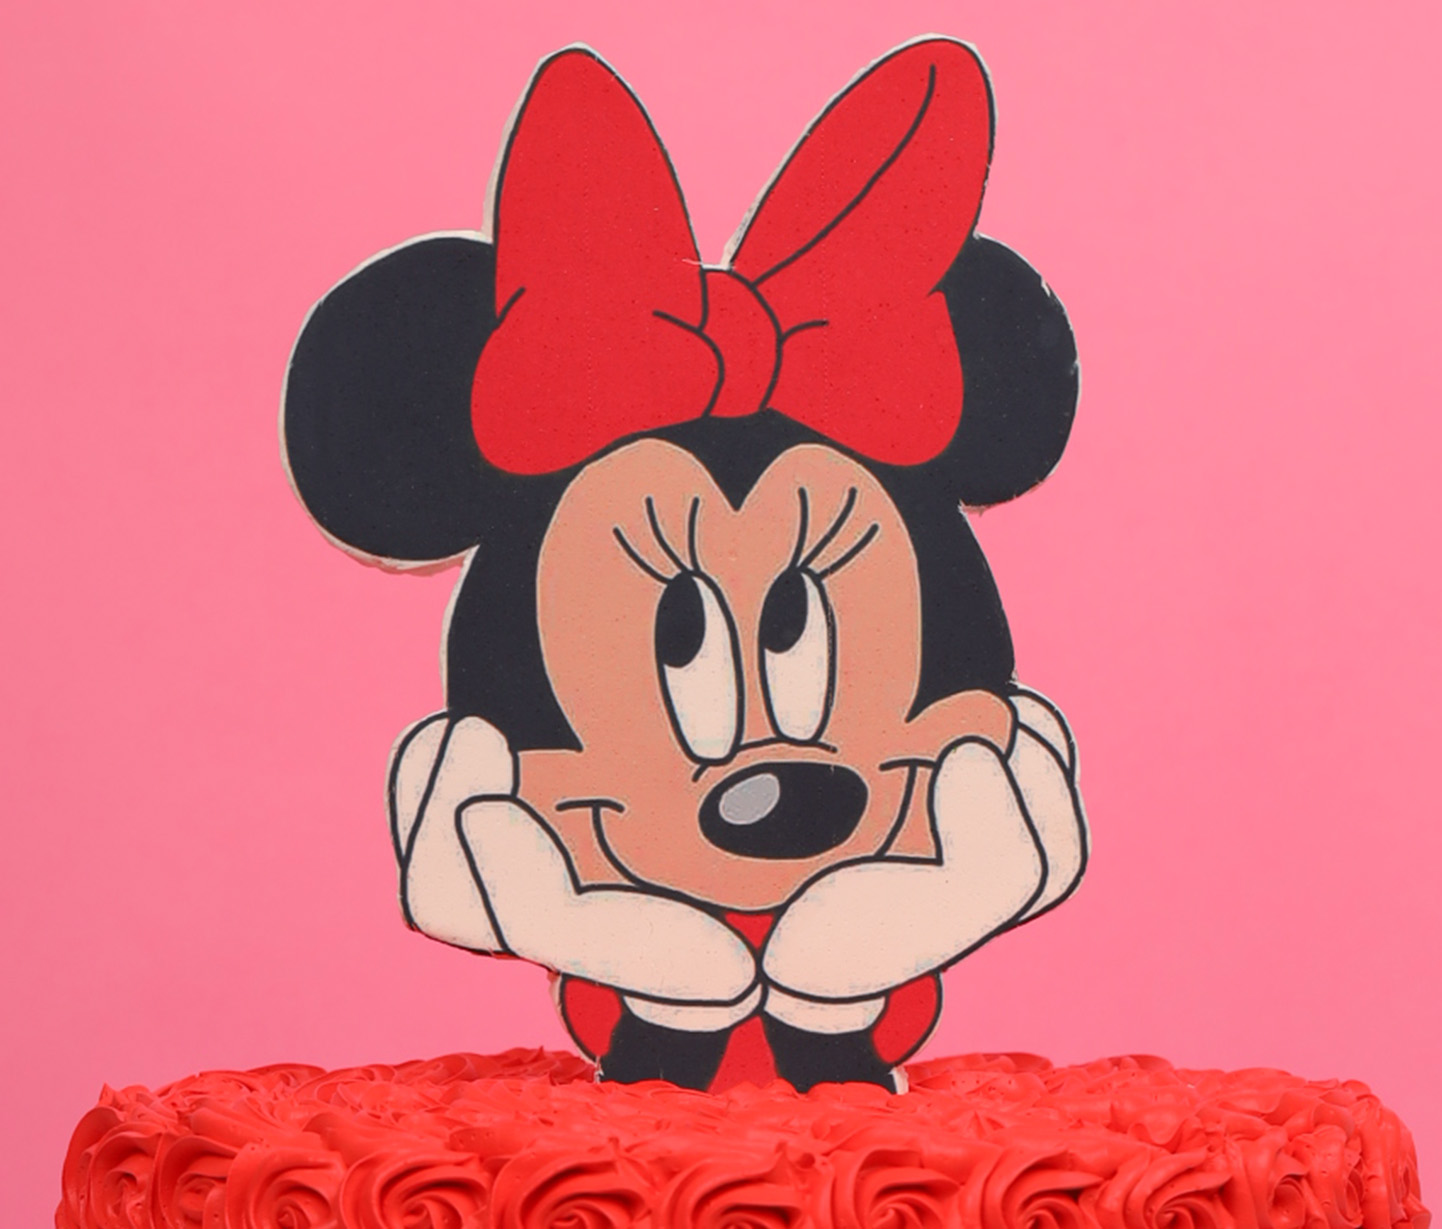 Cake decorating tutorials | how to make a DISNEY MINNIE MOUSE Cake |  Sugarella Sweets - YouTube